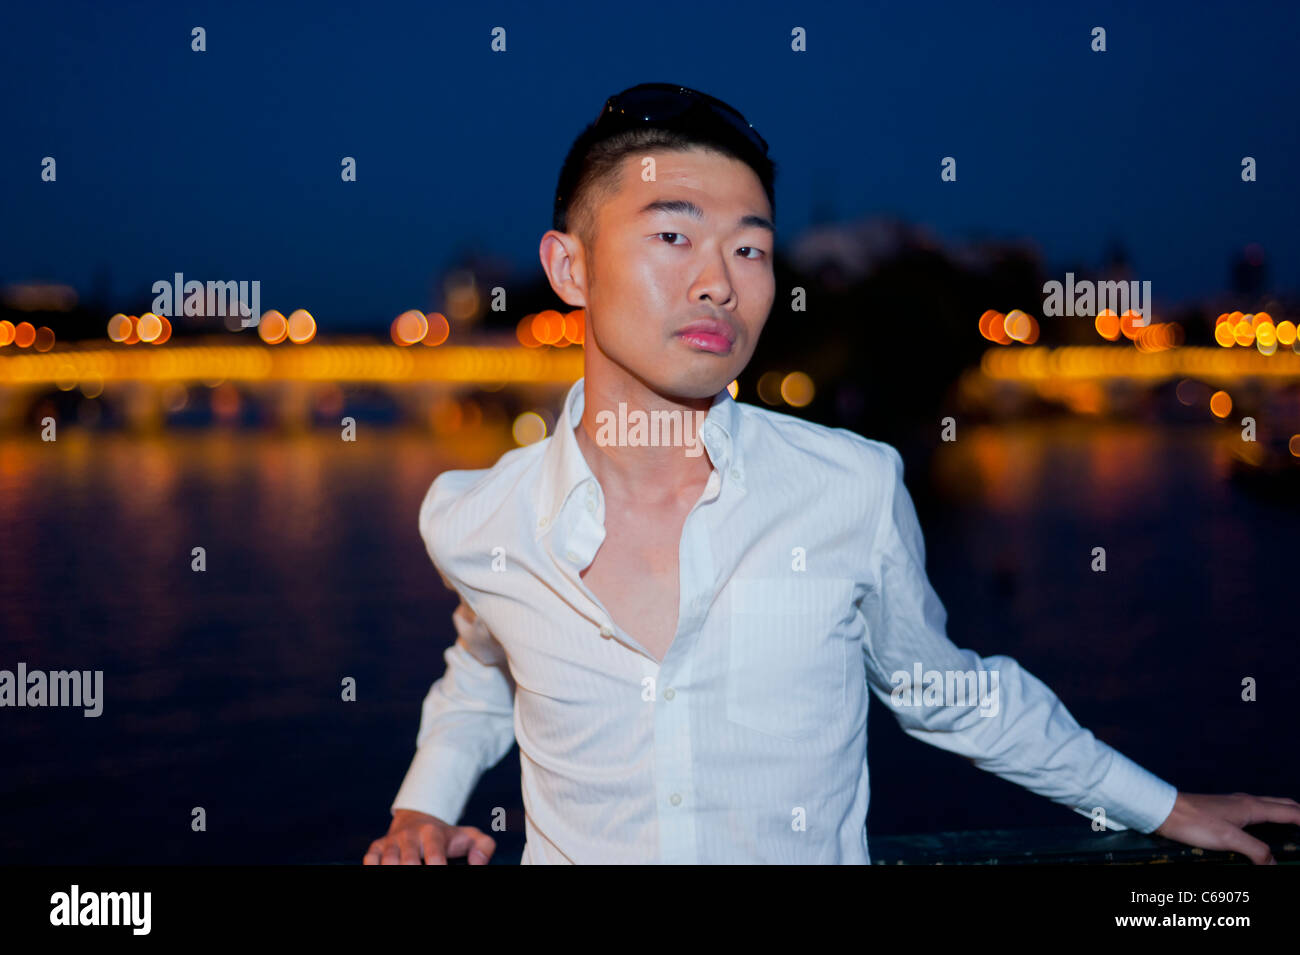 Portrait, Young Man, Chinese Outside at Night, Paris, France, man face Frontal, White Shirt Stock Photo